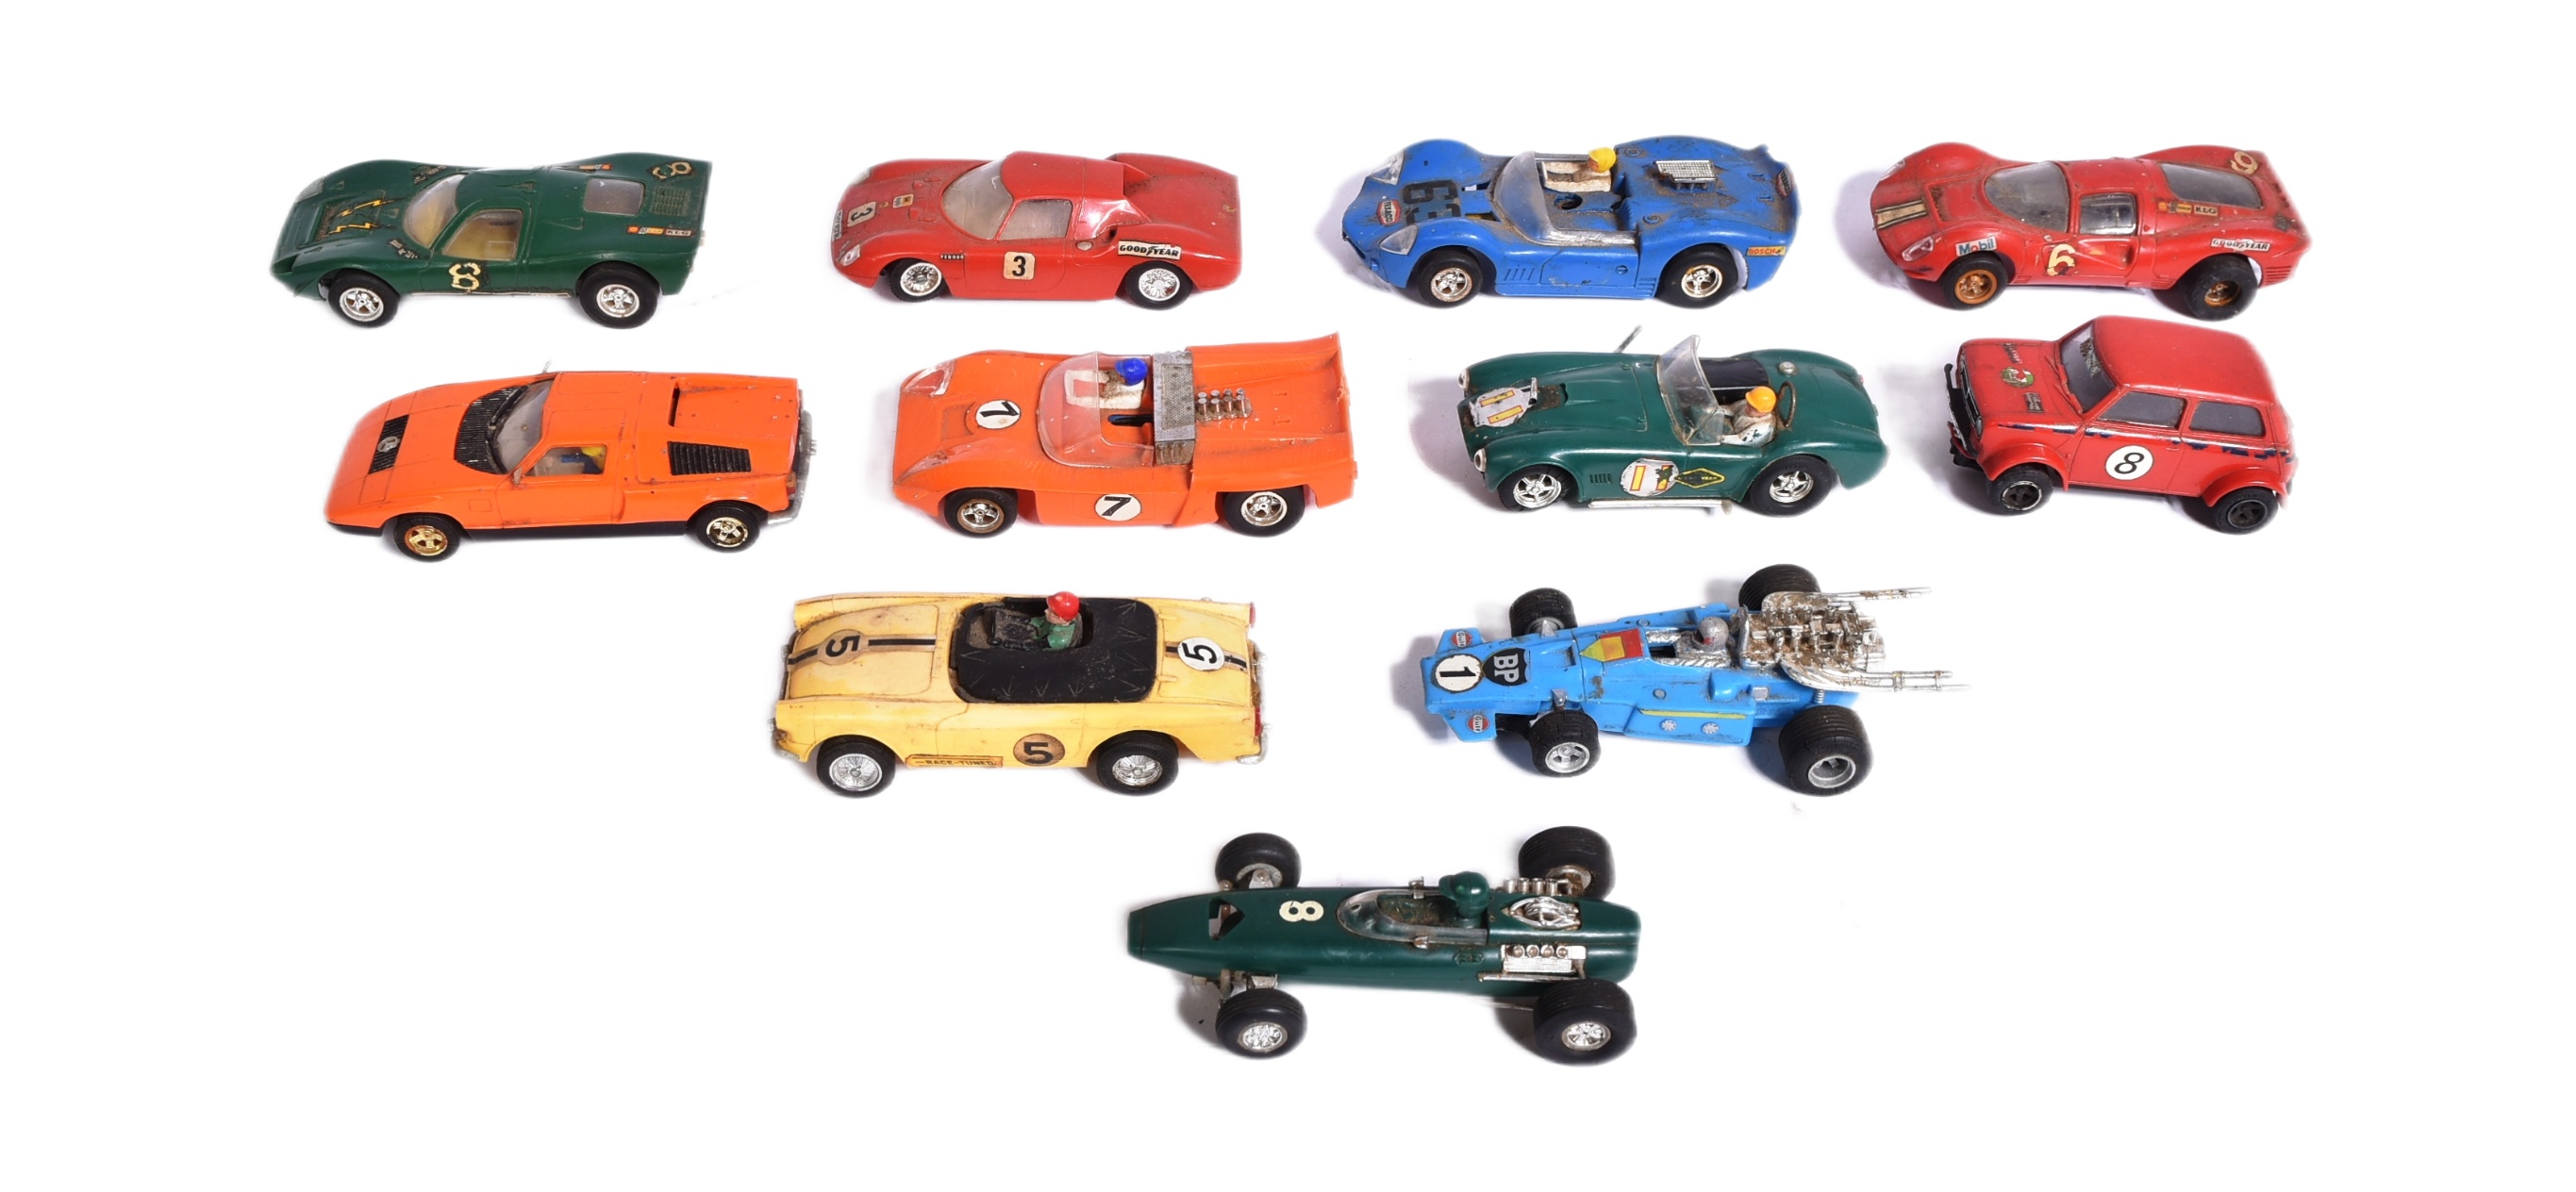 SCALEXTRIC - COLLECTION OF VINTAGE SCALEXTRIC SLOT CARS